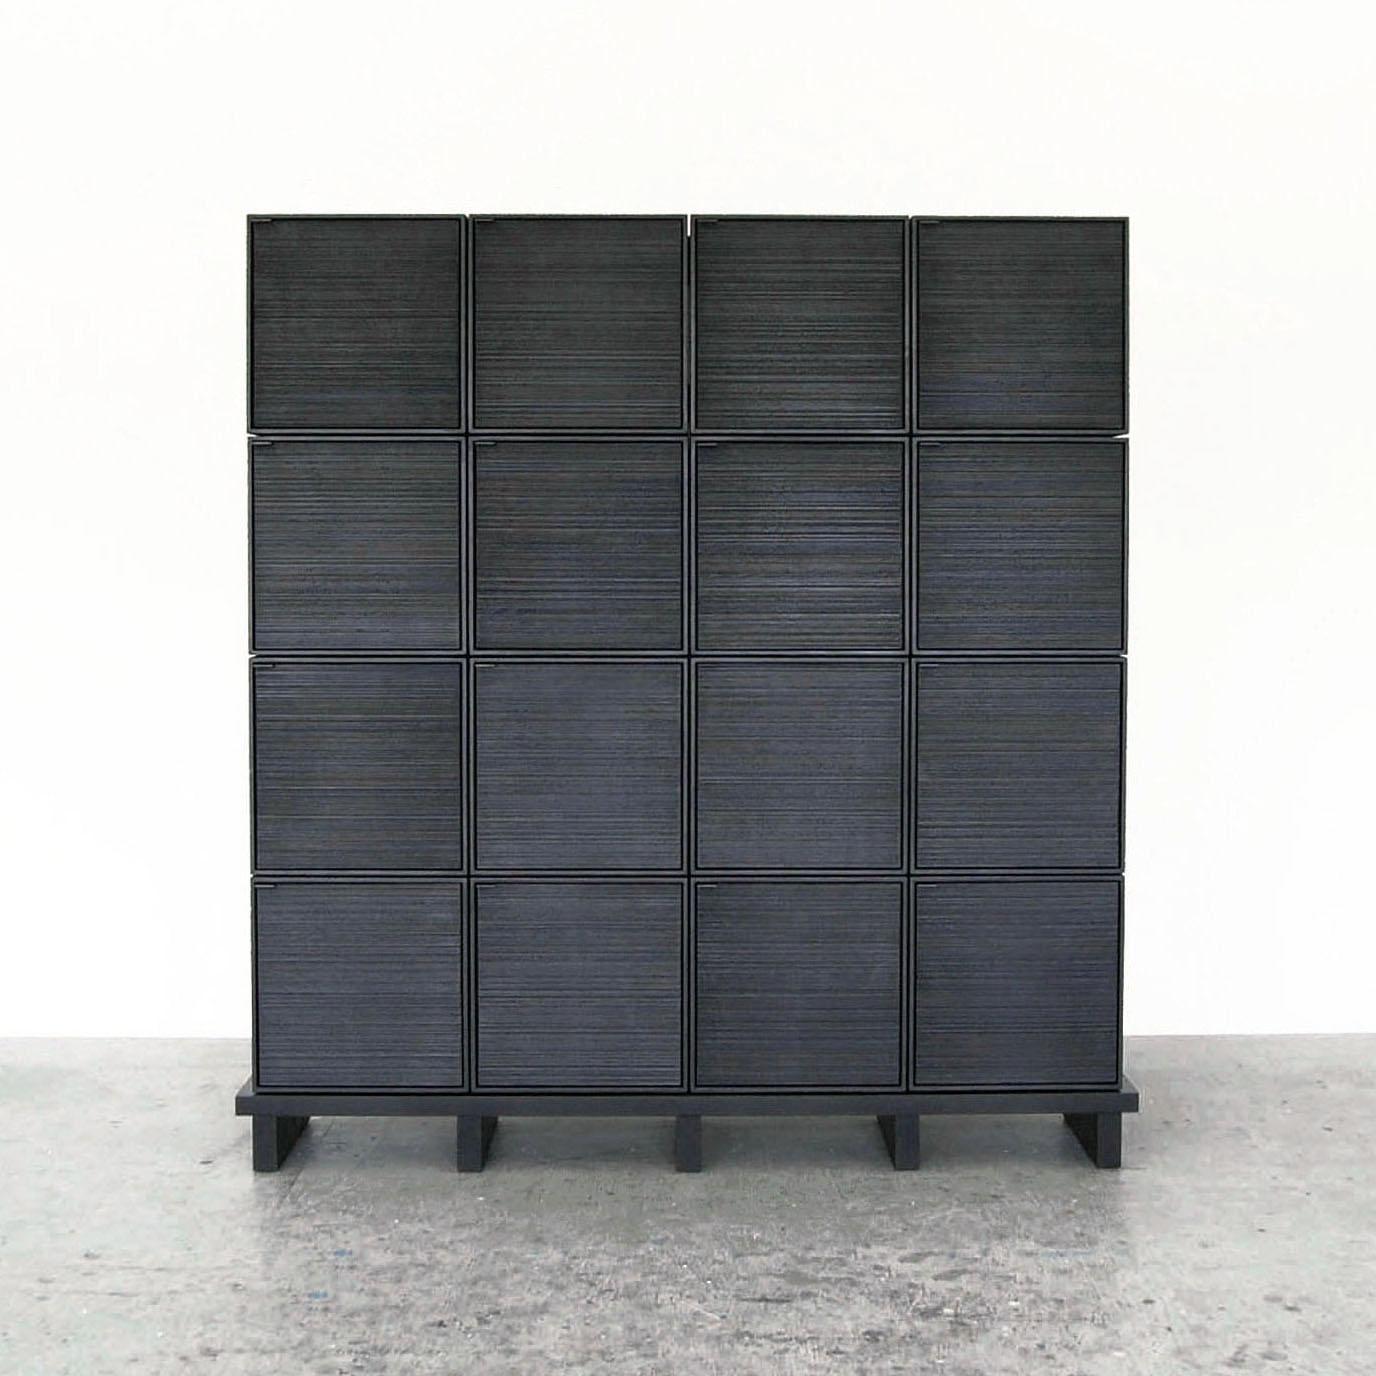 16 cubes cabinet by John Eric Byers
Dimensions: D150 x W38 x H165 cm
Materials: sawn + blackened + maple + ash

All works are individually handmade to order.

John Eric Byers creates geometrically inspired pieces that are minimal, emotional,